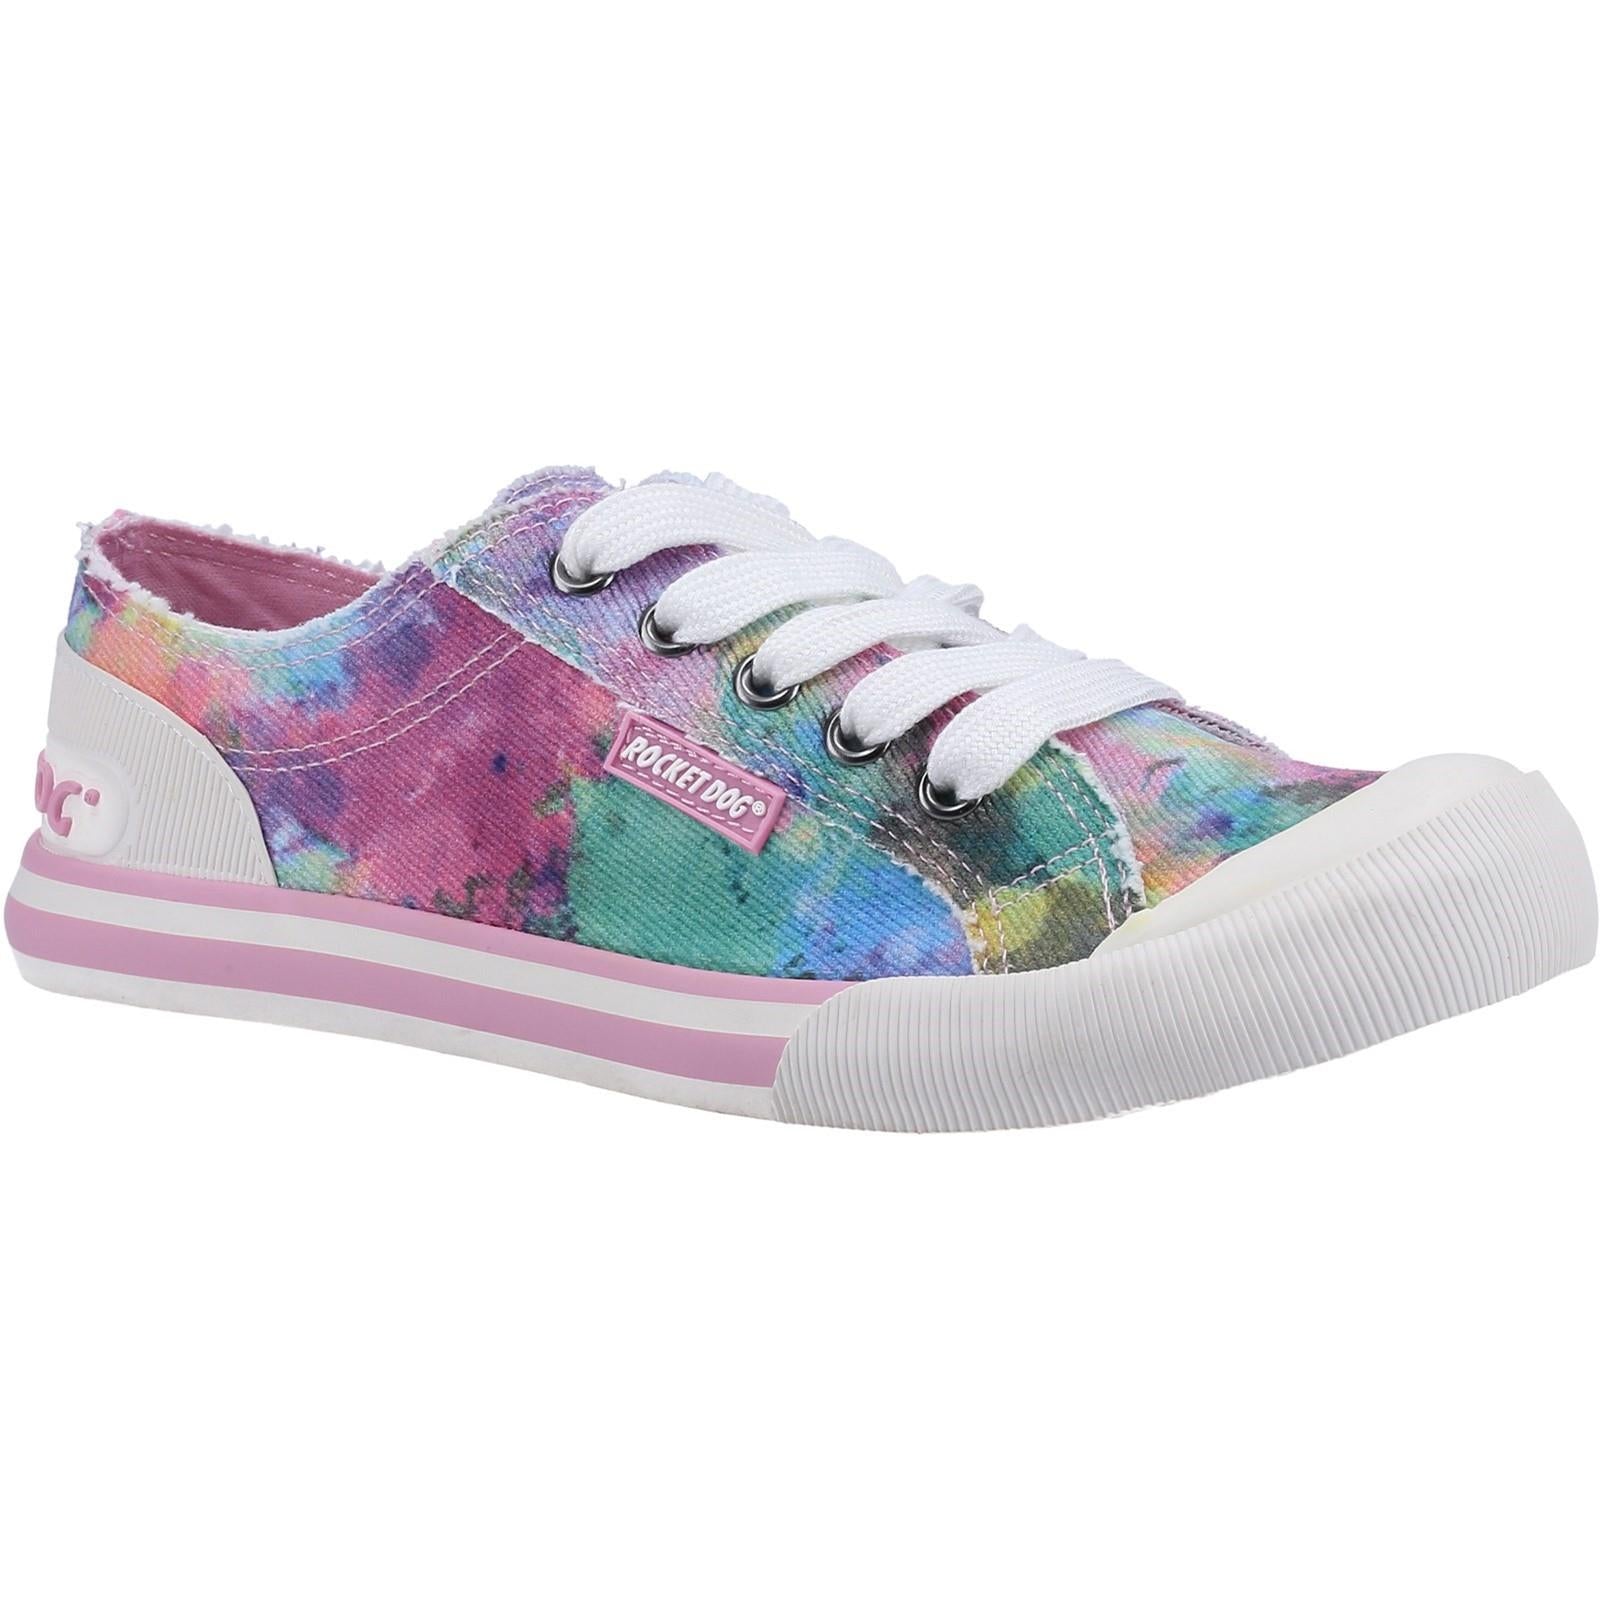 Rocket Dog Jazzin Candy Tie Dye ladies lace up plimsoll trainers shoes